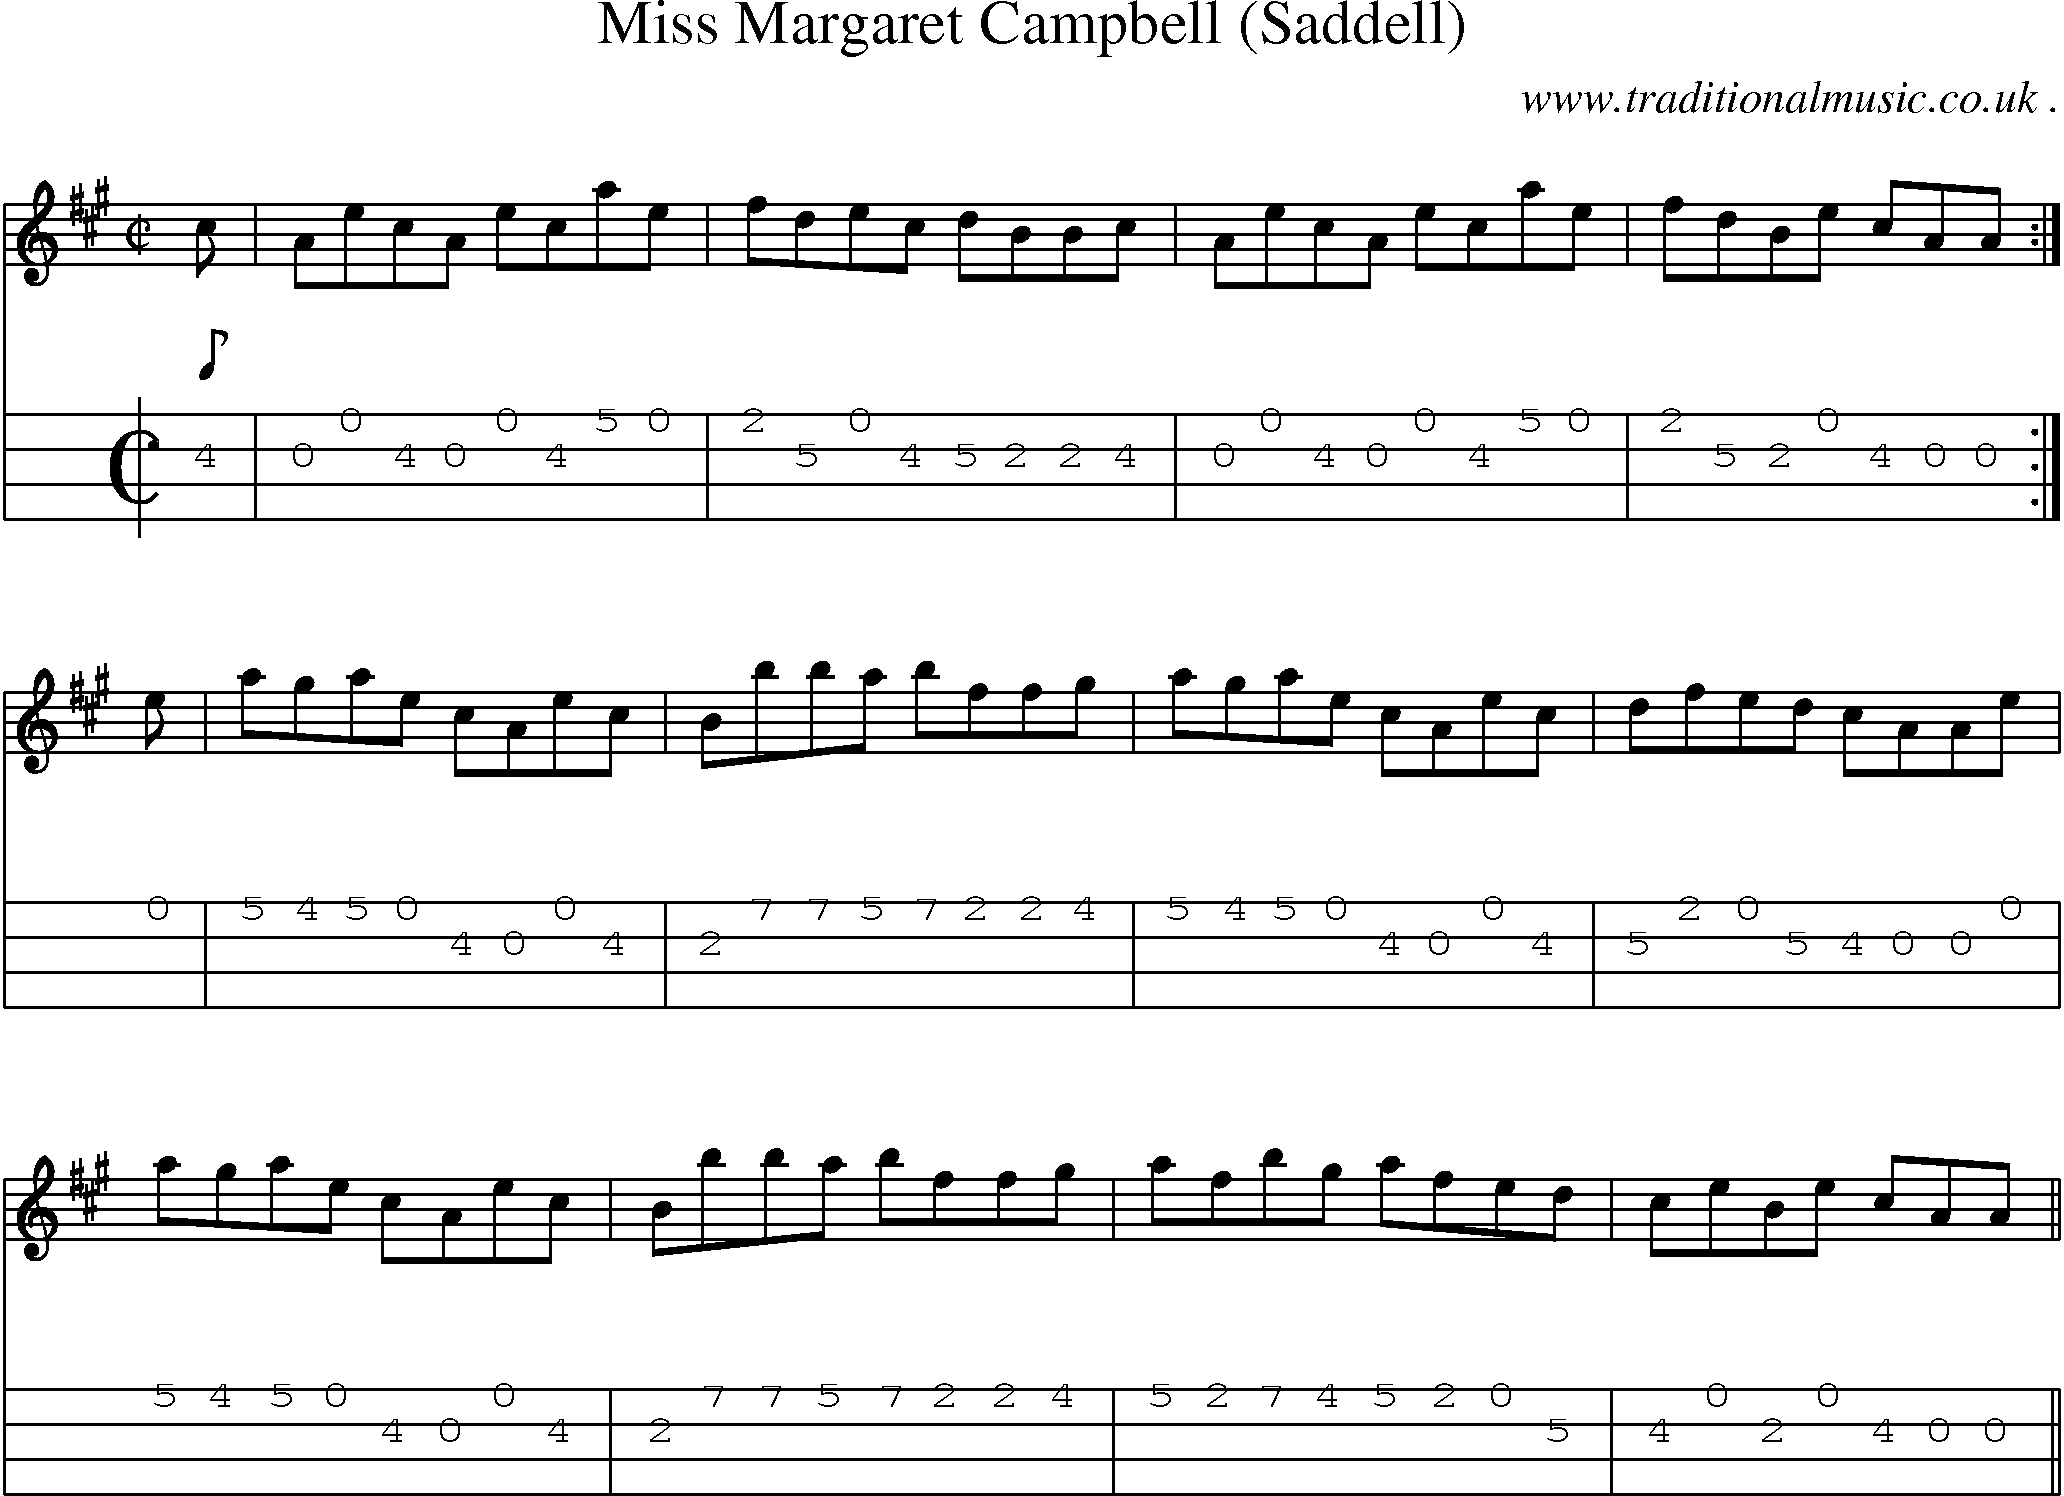 Sheet-music  score, Chords and Mandolin Tabs for Miss Margaret Campbell Saddell